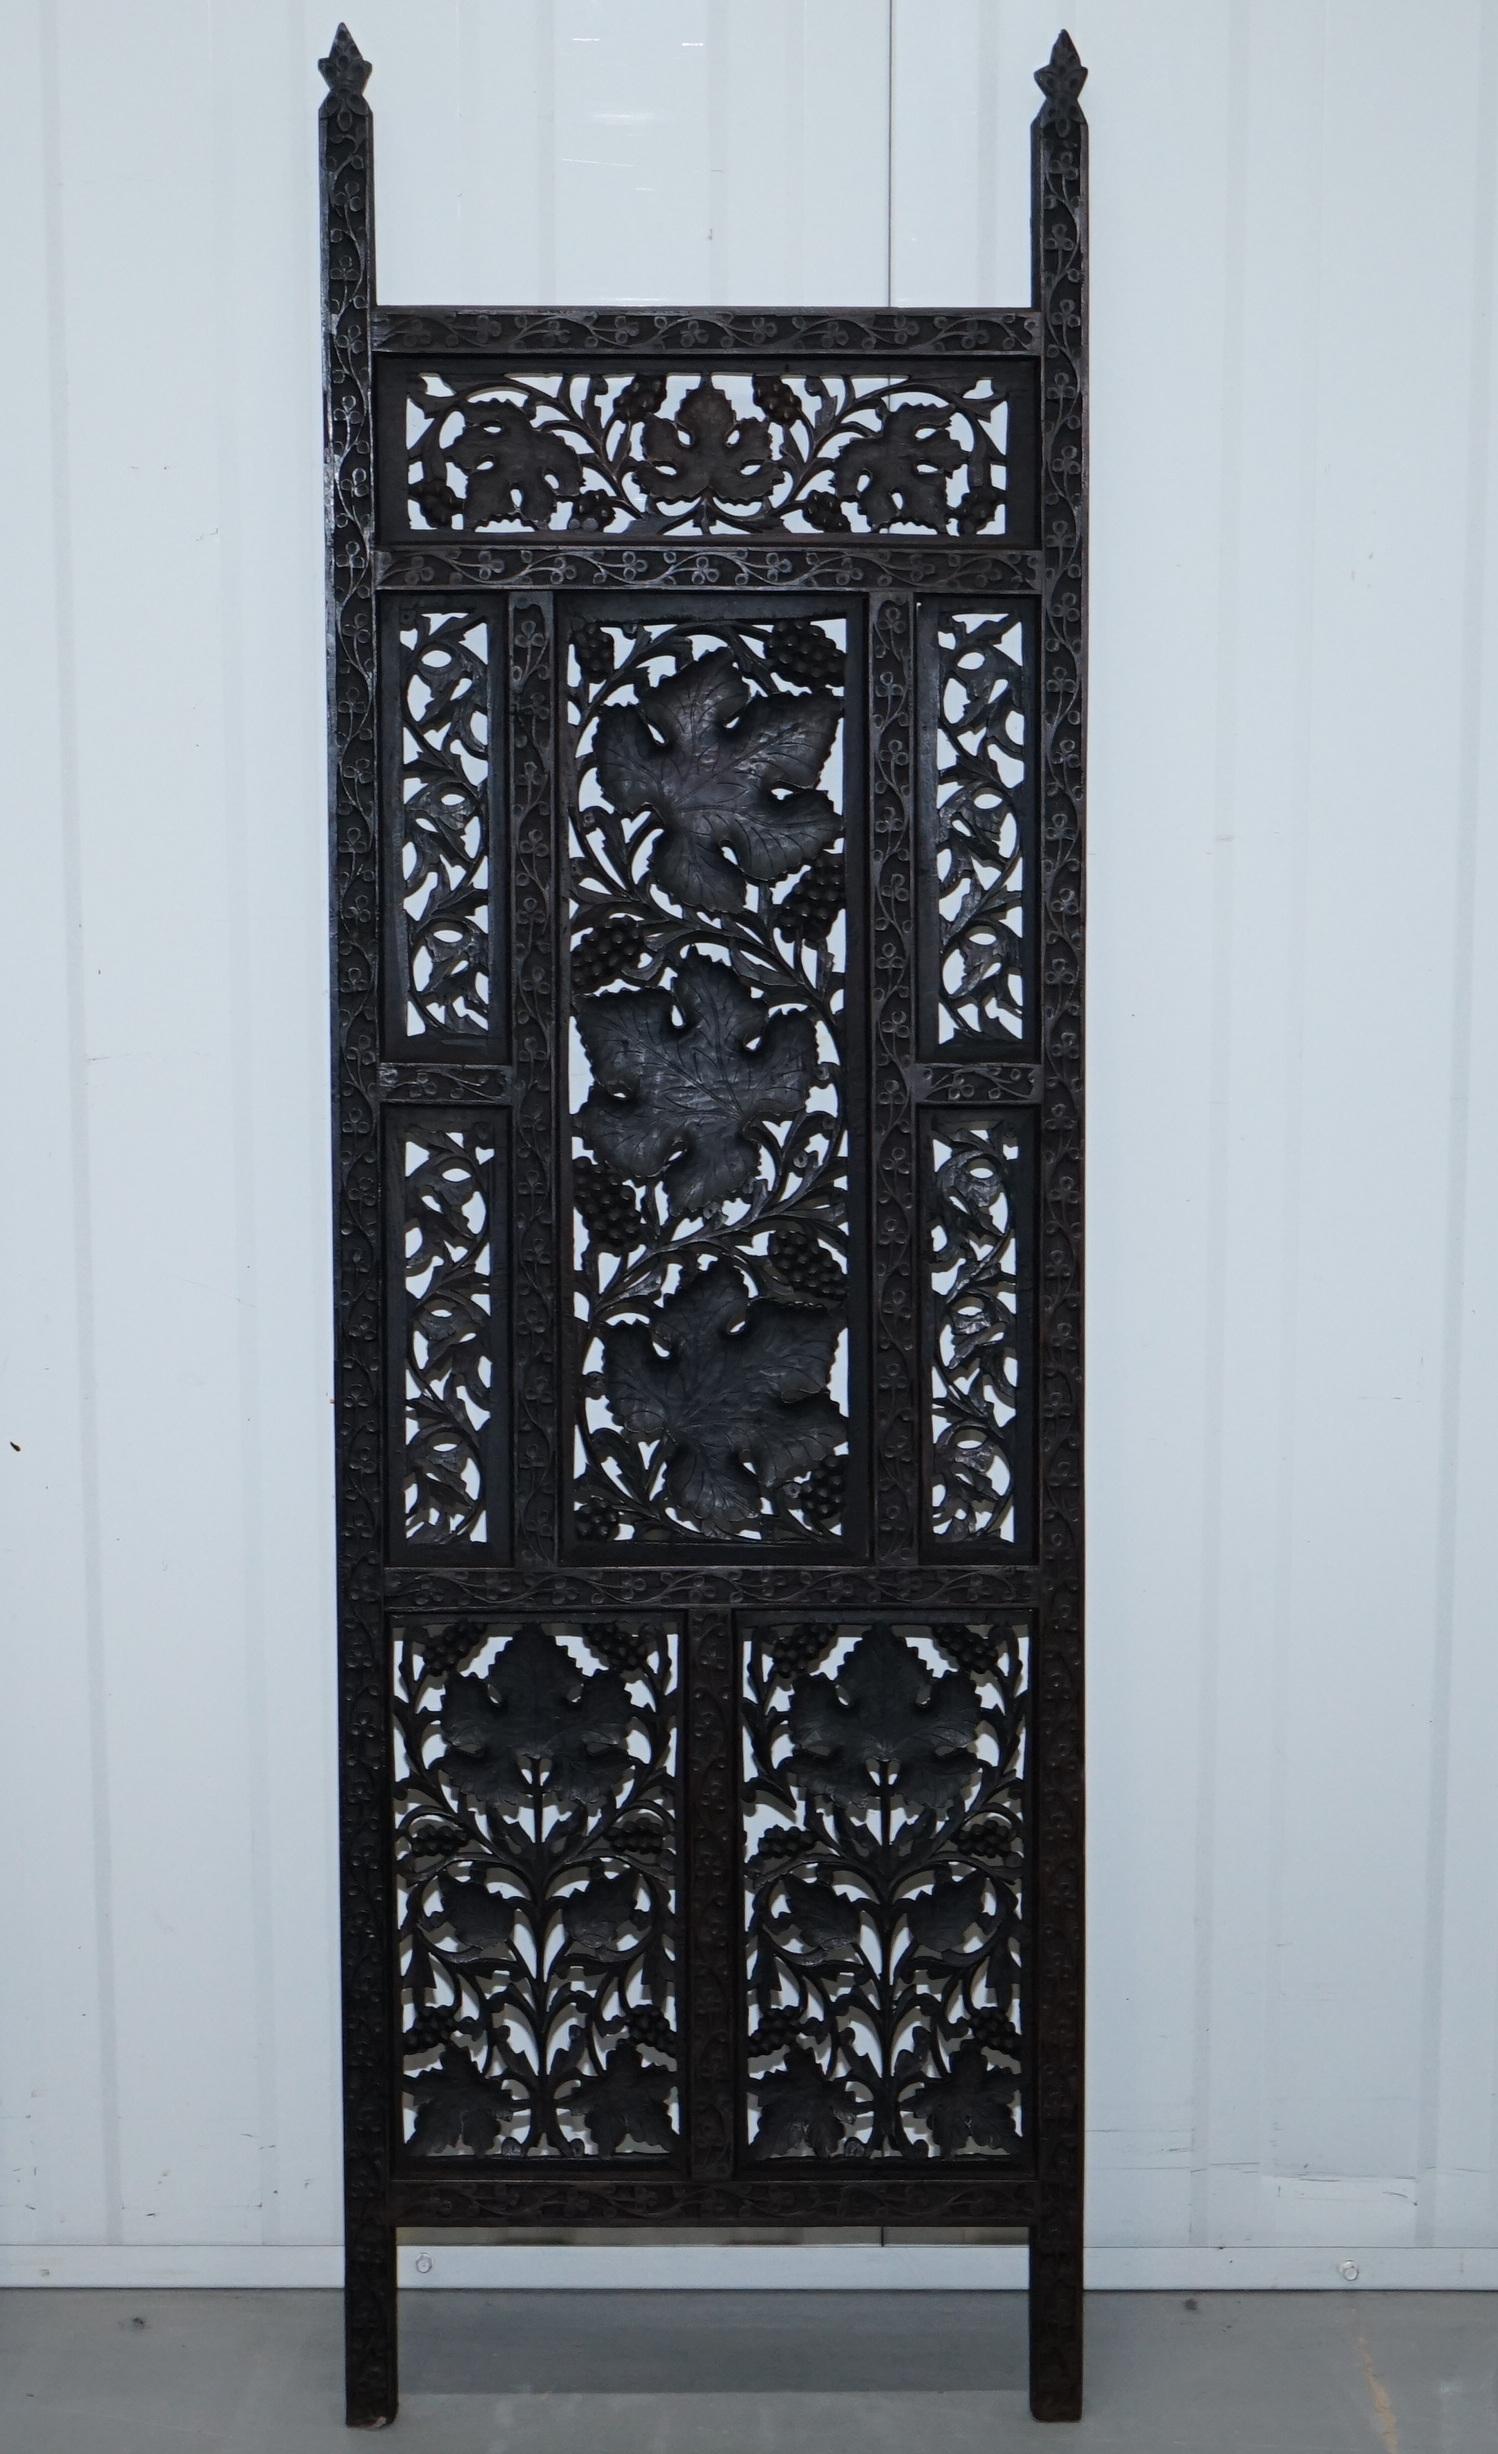 We are delighted to offer for sale this lovely set of three fretwork carved solid teak Chinese leaf detailed wall panels

A very ornate and artistically carved set, I see these mounted to the wall or free standing, they would have once upon a time